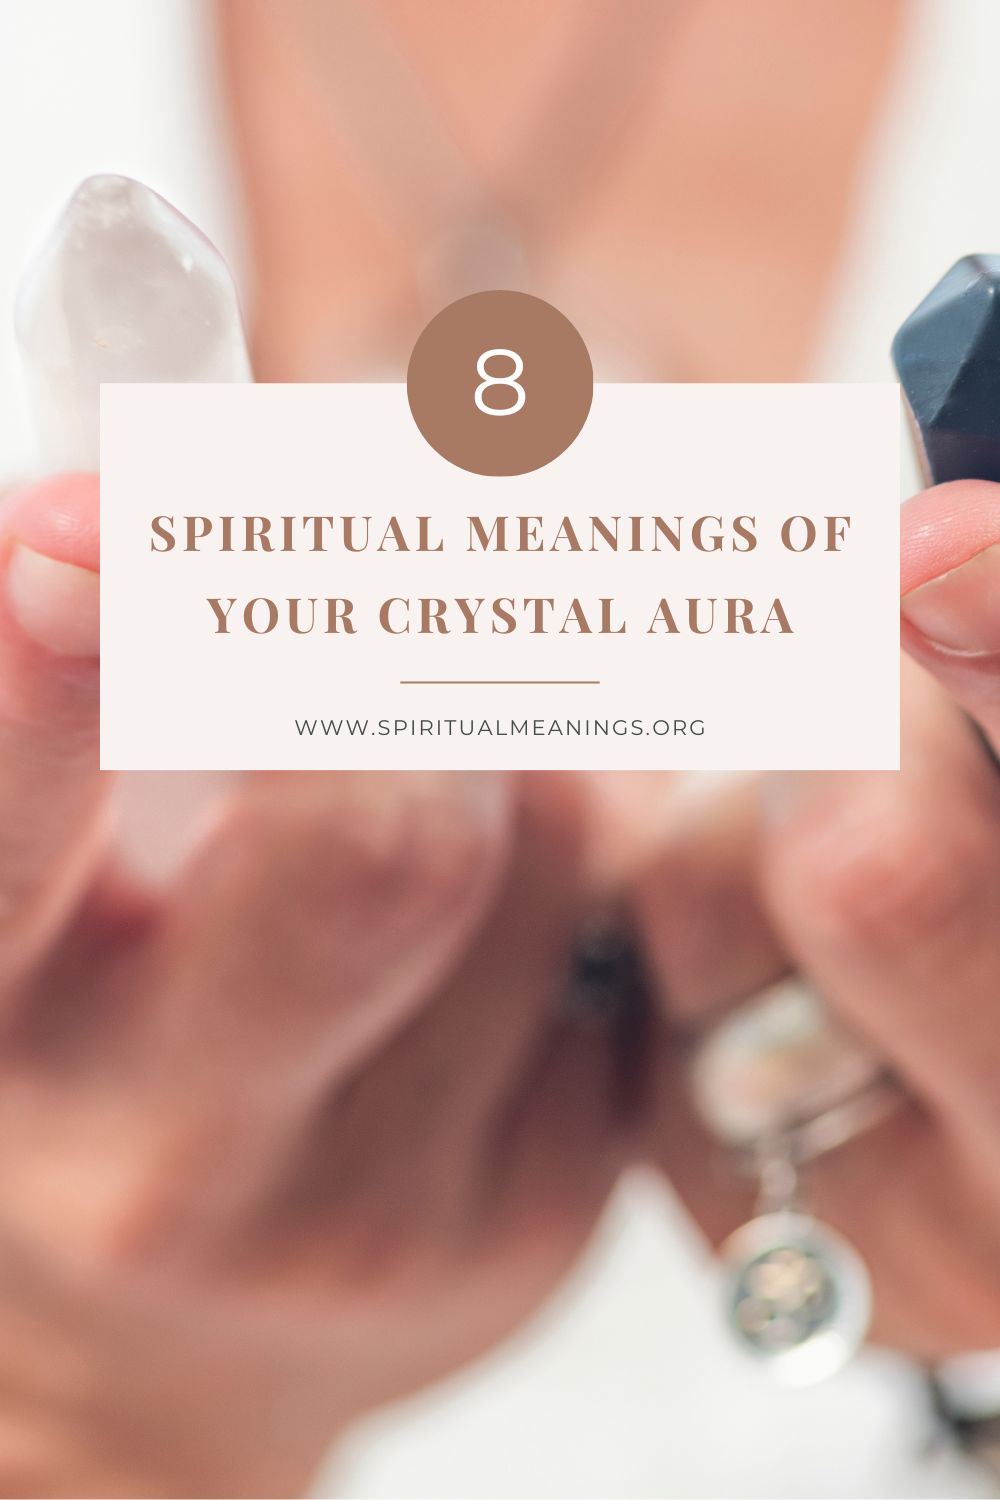 Spiritual Meanings of Your Crystal Aura